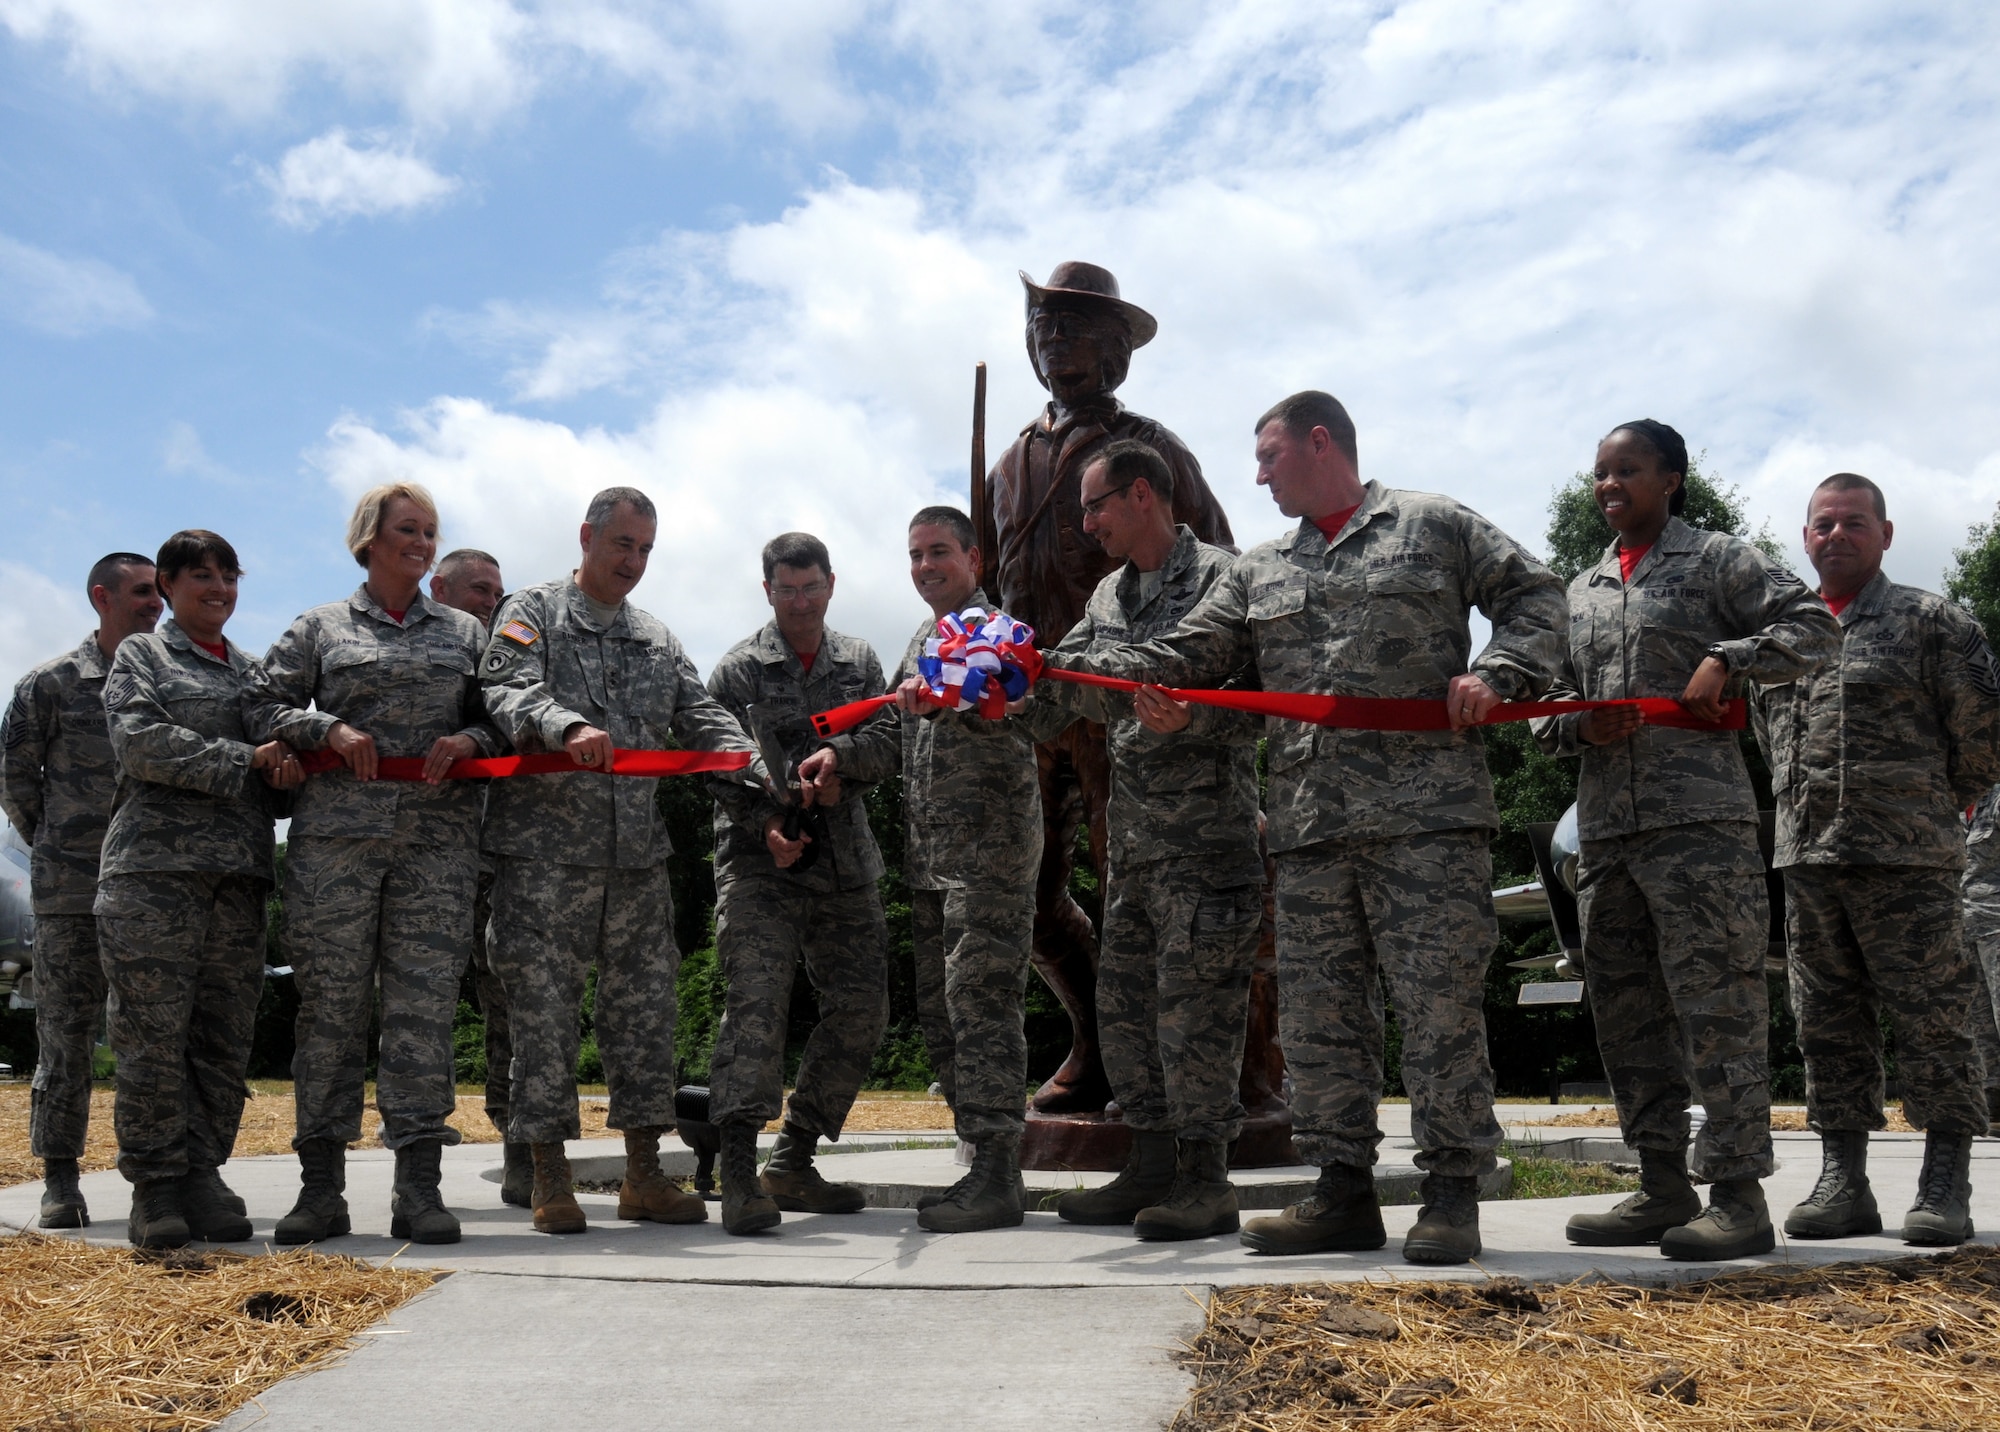 Airmen and officers of the 131st Bomb Wing and 509th Bomb Wing cut the ceremonial ribbon at the 131st Bomb Wing Heritage Park during the dedication ceremony at Whiteman Air Force Base, Missouri, June 12, 2015. Col. Michael Francis, 131st Bomb Wing commander, cut the ribbon to open the new park that hosts Whiteman’s newest static aircraft, along with Missouri Adjutant General Maj. Gen. Steve Danner, 509th Bomb Wing Commander Brig. Gen. Paul Tibbets IV, Brig. Gen. Greg Champagne, and Airmen of the 131st Bomb Wing.  (U.S. Air National Guard photo by Senior Airman Nathan Dampf)